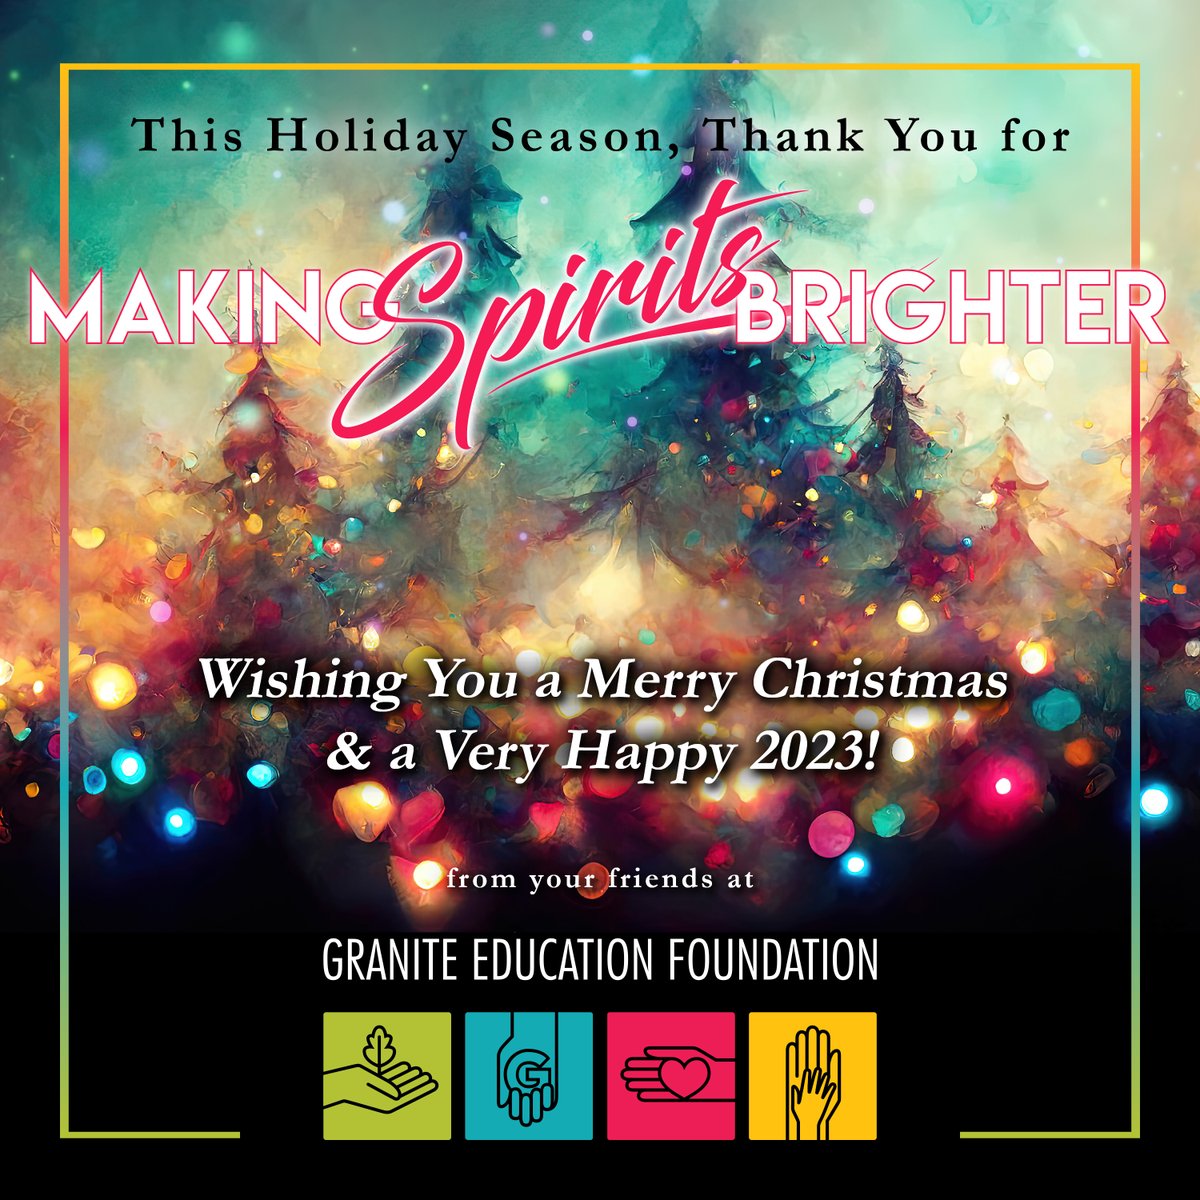 This holiday season, we want to express our genuine thanks and admiration to everyone in the Granite School District community. Thank you for “Making Spirits Brighter!” Have a merry Christmas and very happy 2023!